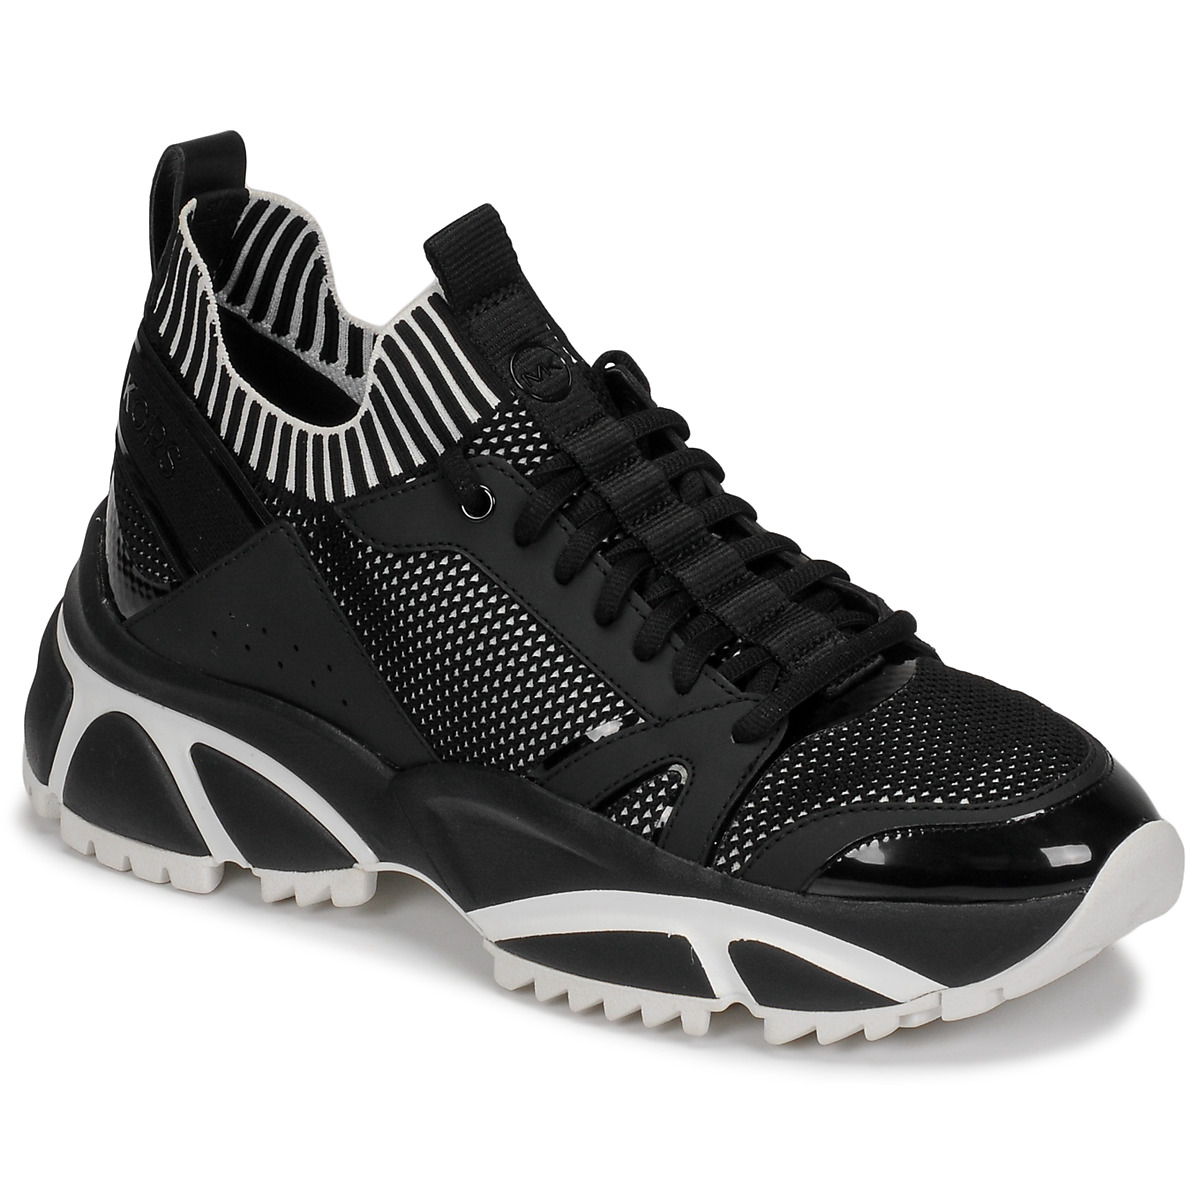 Michael Michael Kors Outlet sneakers for man  Black  Michael Michael Kors  sneakers 42F9MIFS2S online on GIGLIOCOM